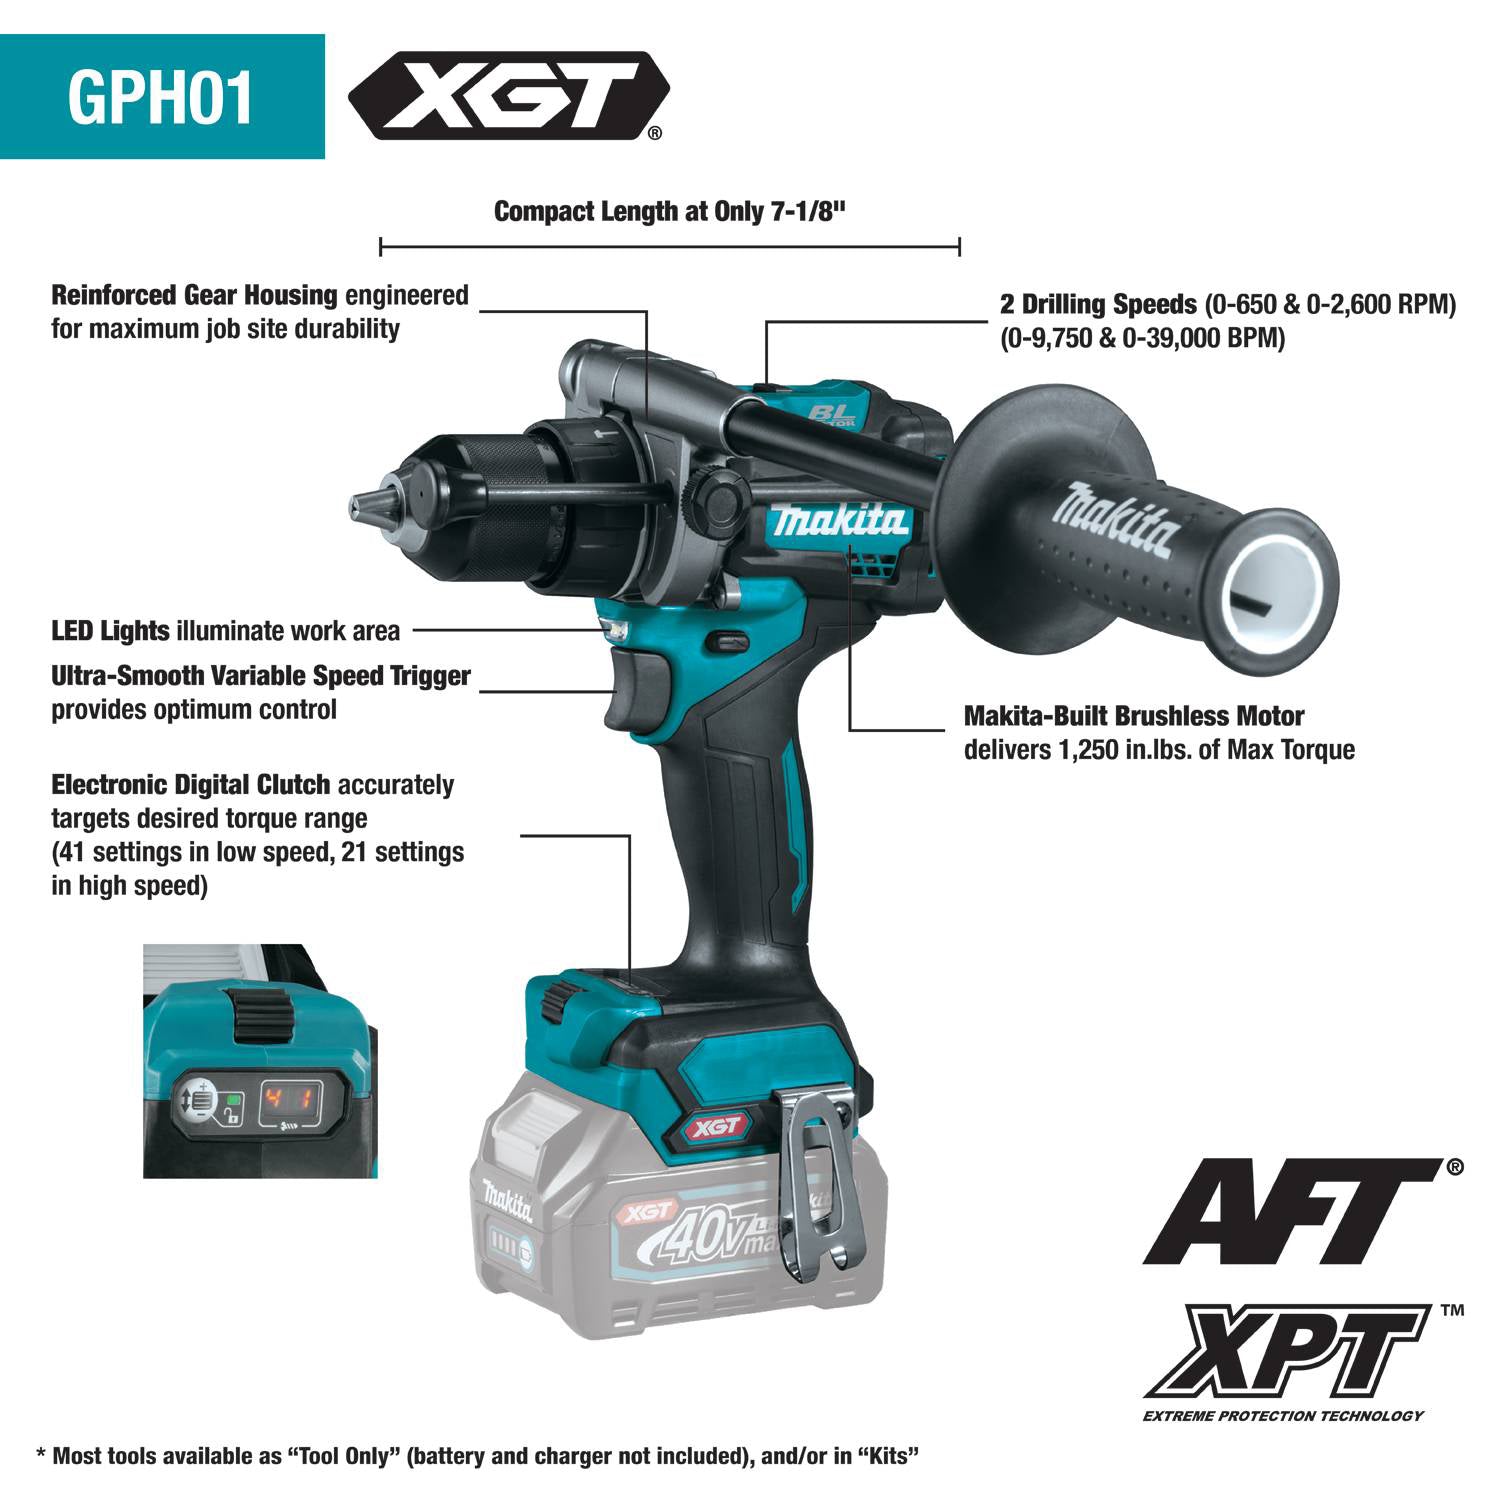 40V Max XGT Lithium-Ion Brushless Cordless 1/2" Hammer Driver‑Drill (Tool Only)